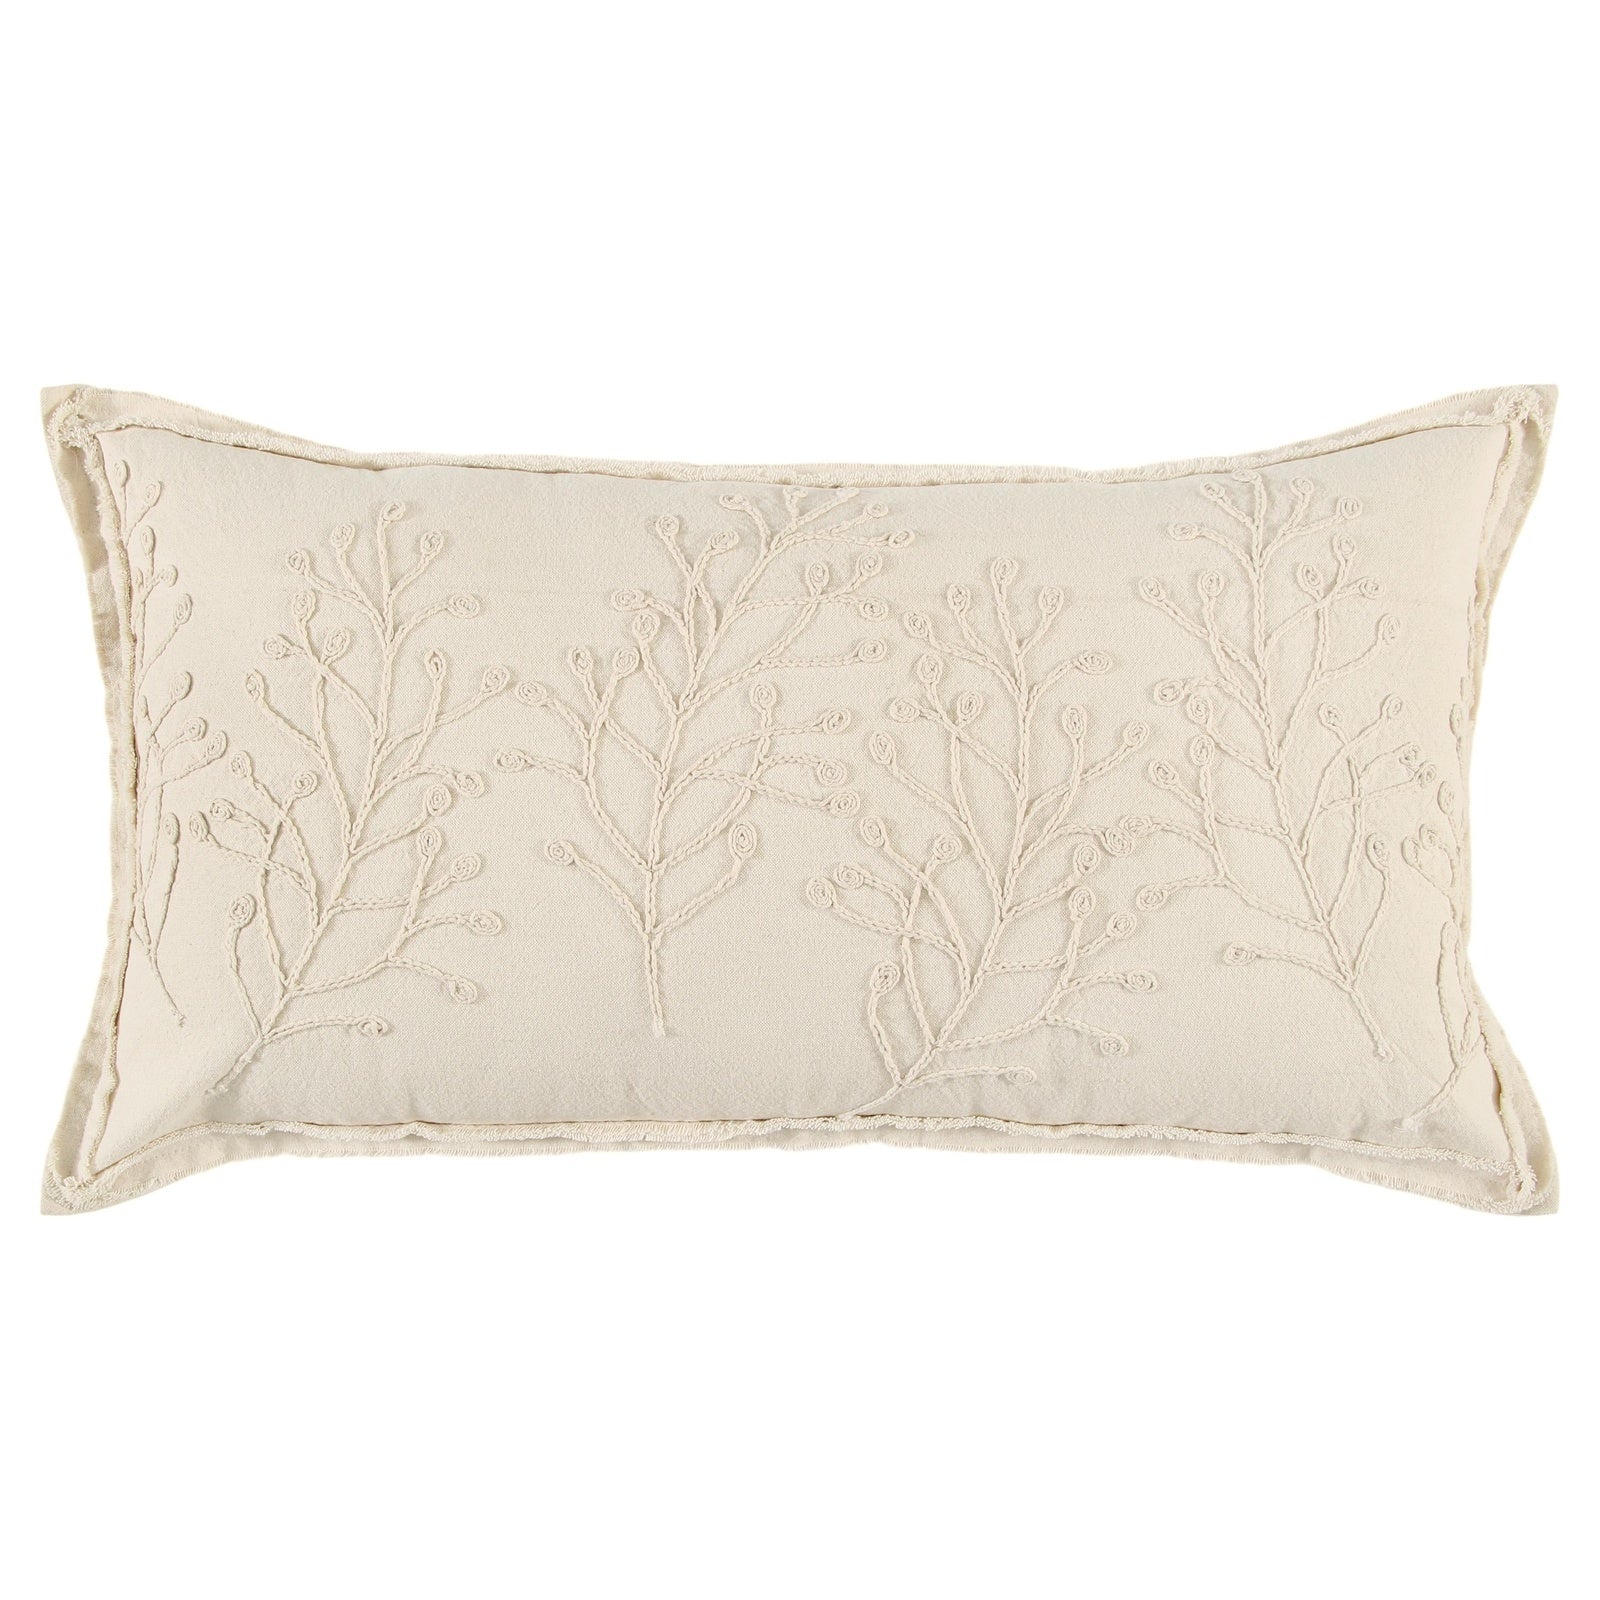 Embroidered Knife Edged Cotton Botanical Pillow Cover - Pier 1